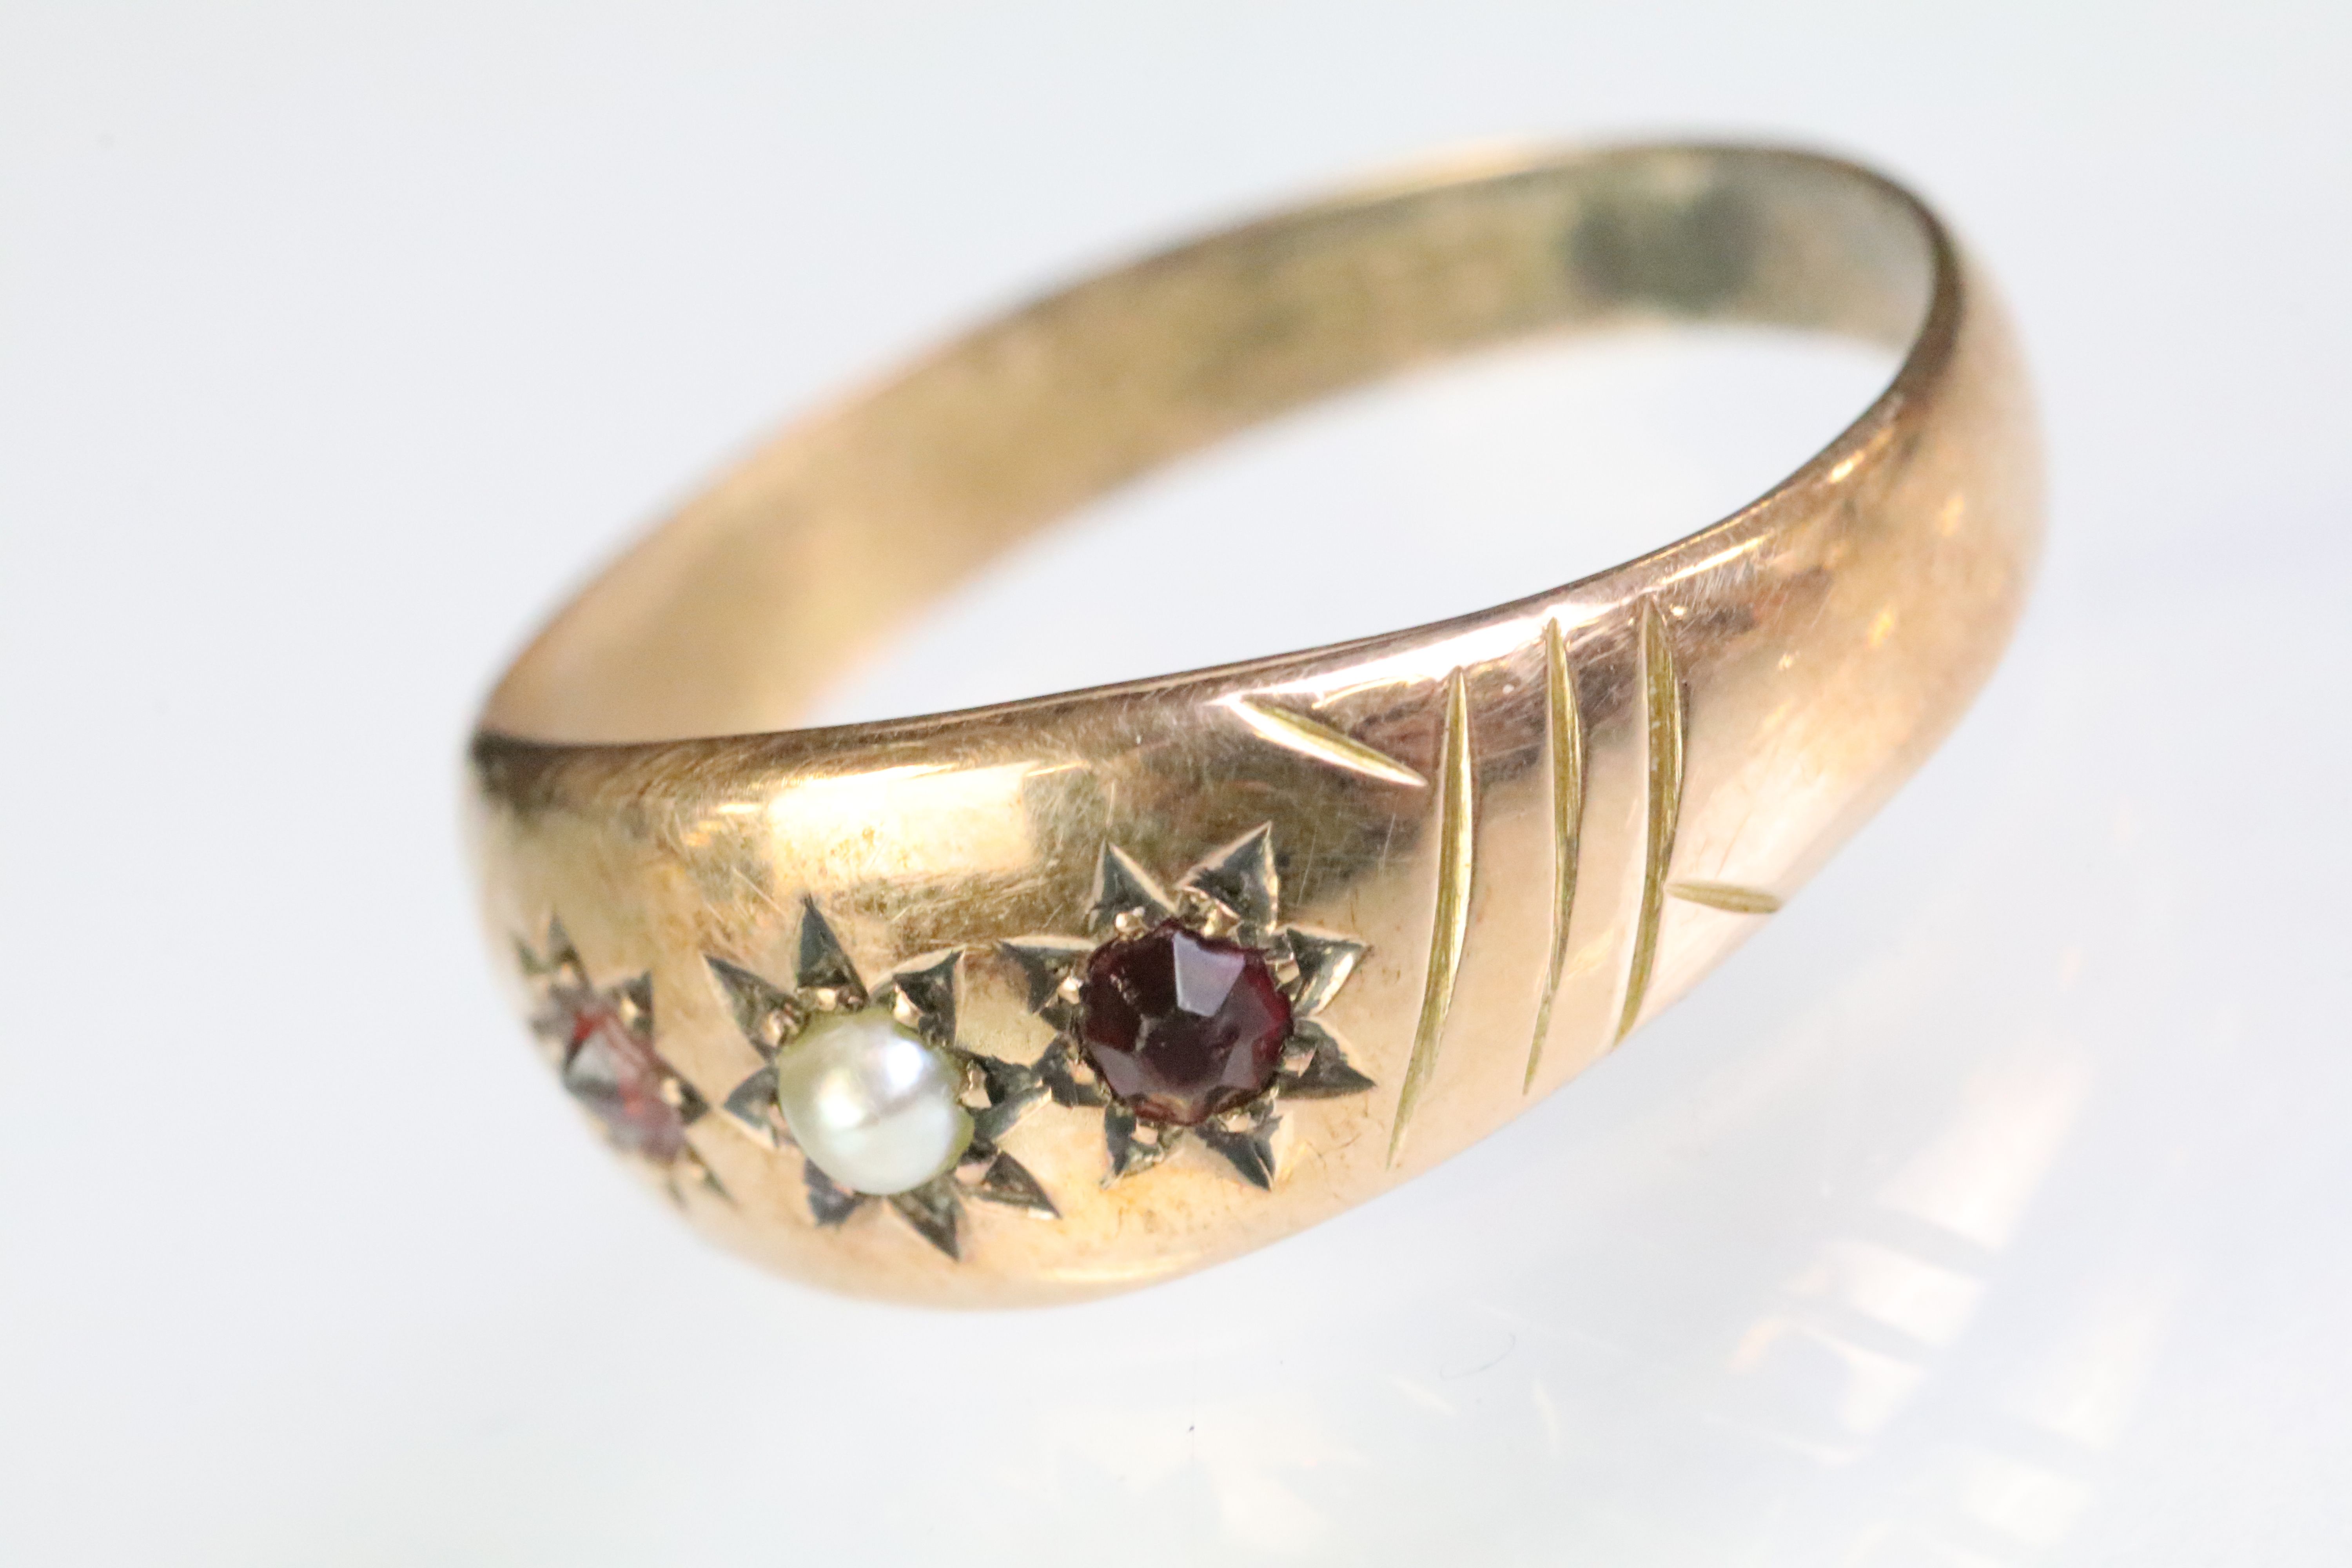 9ct gold pearl and red stone gypsy ring with each stone being star set to the head. Hallmarked